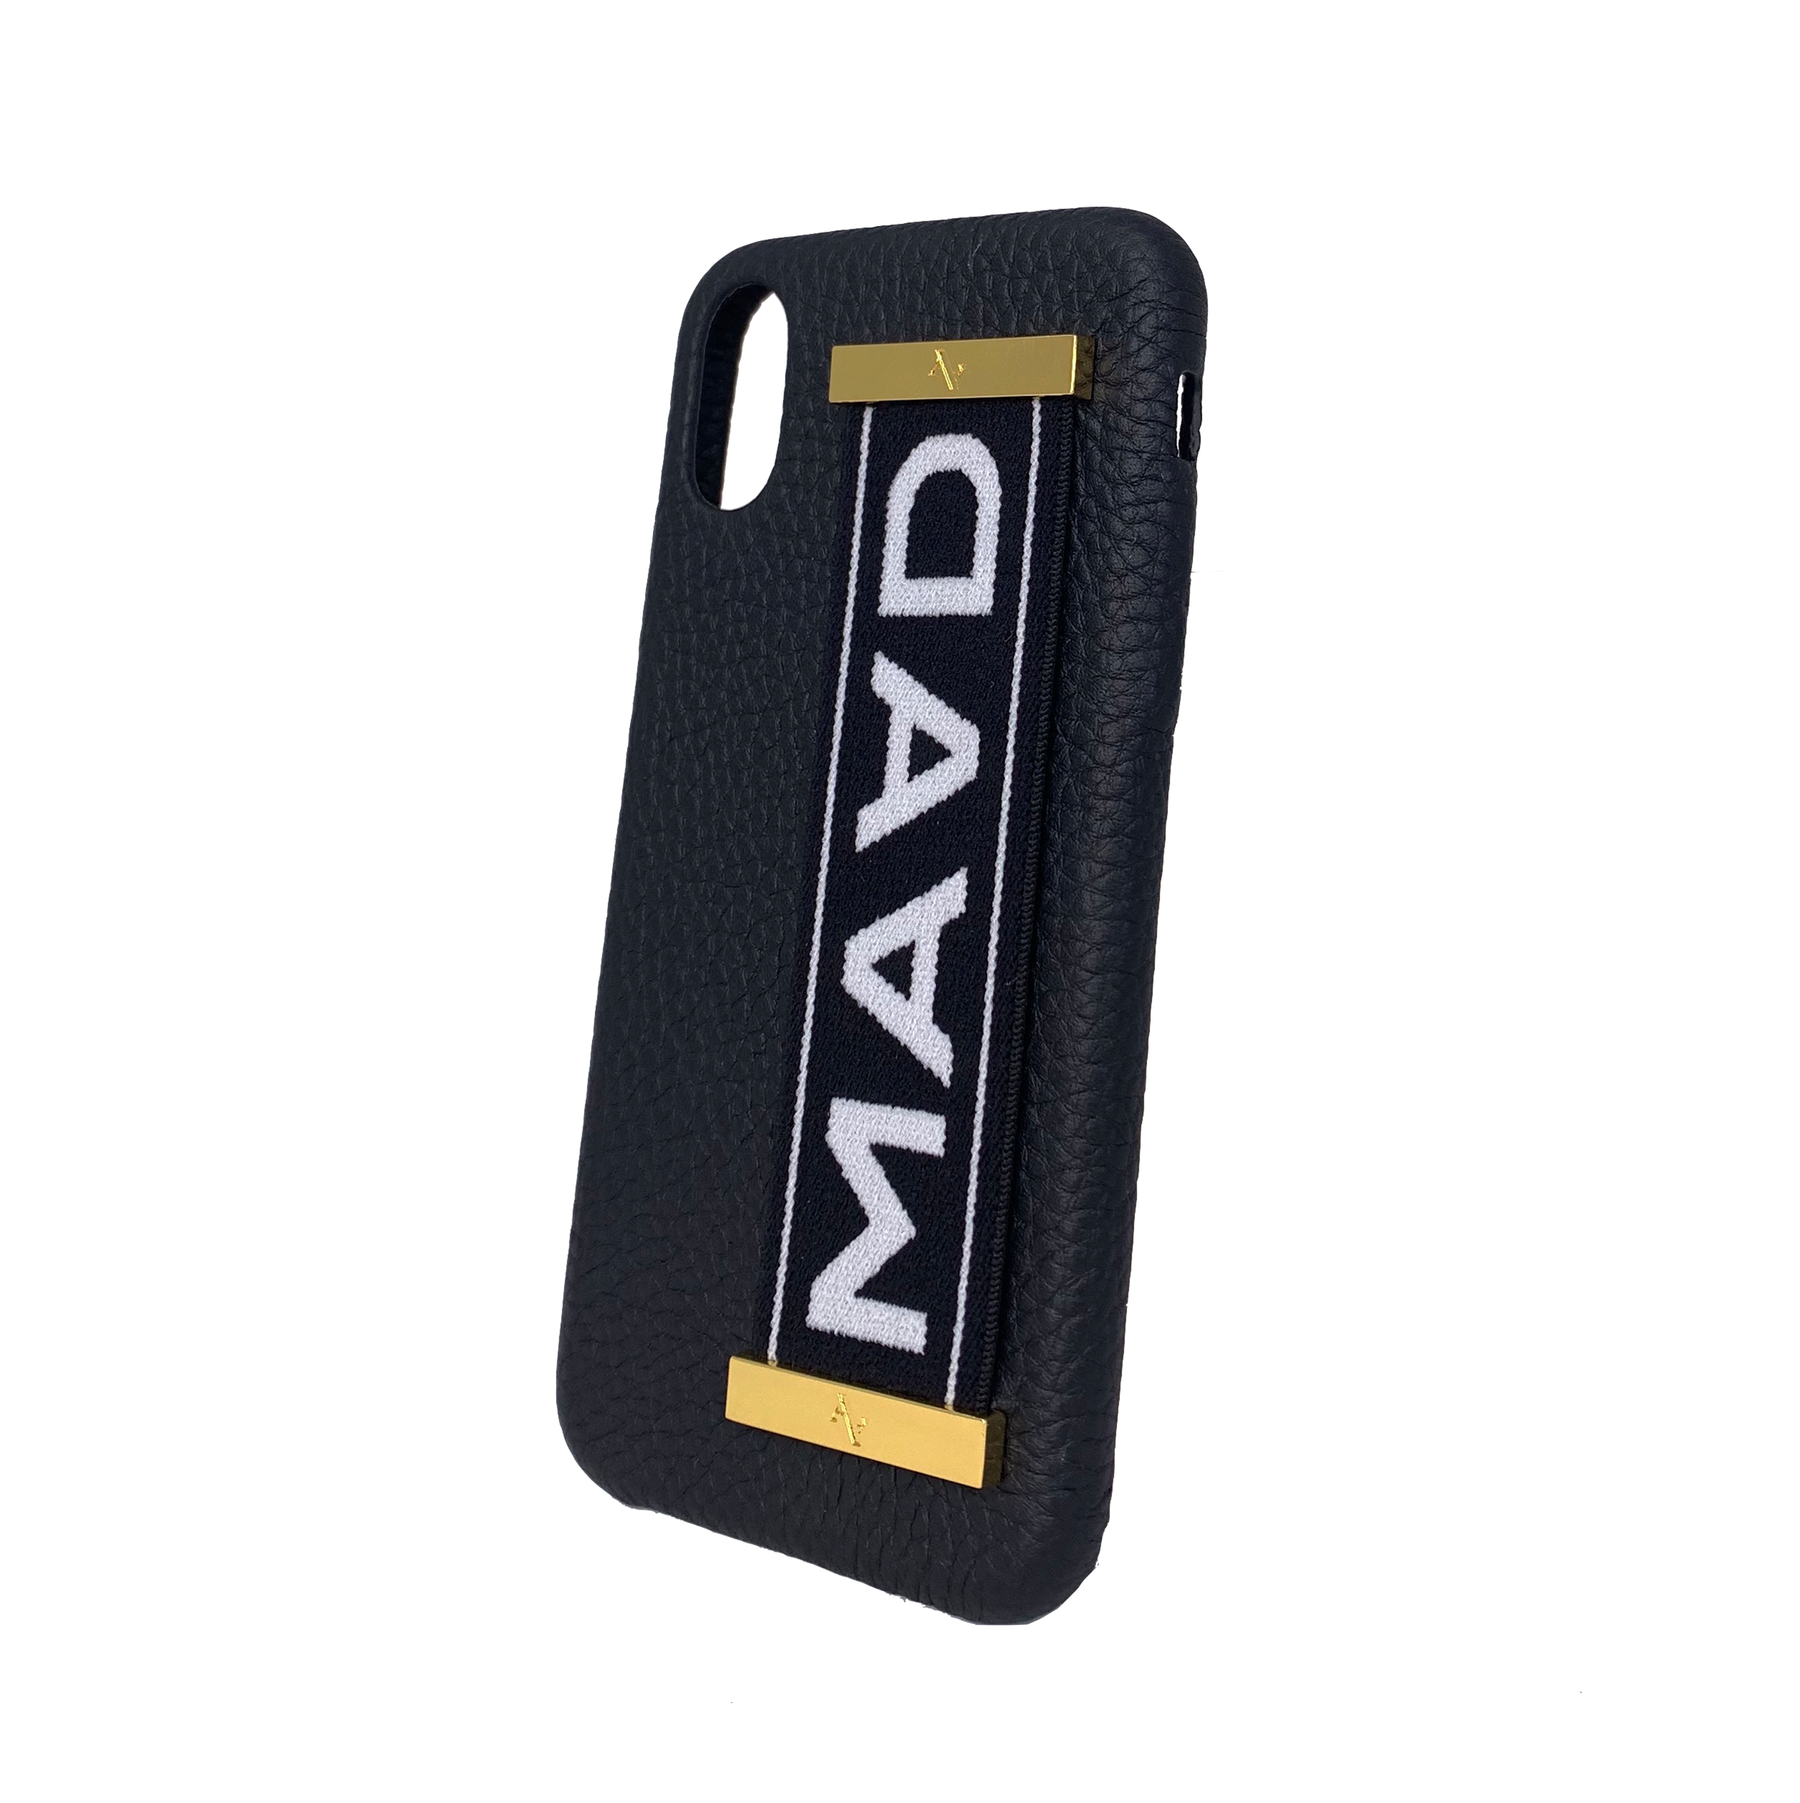 MAAD LVR Black IPhone X/XS Case - MAAD Collective - Saffiano IPhone Personalized Case 